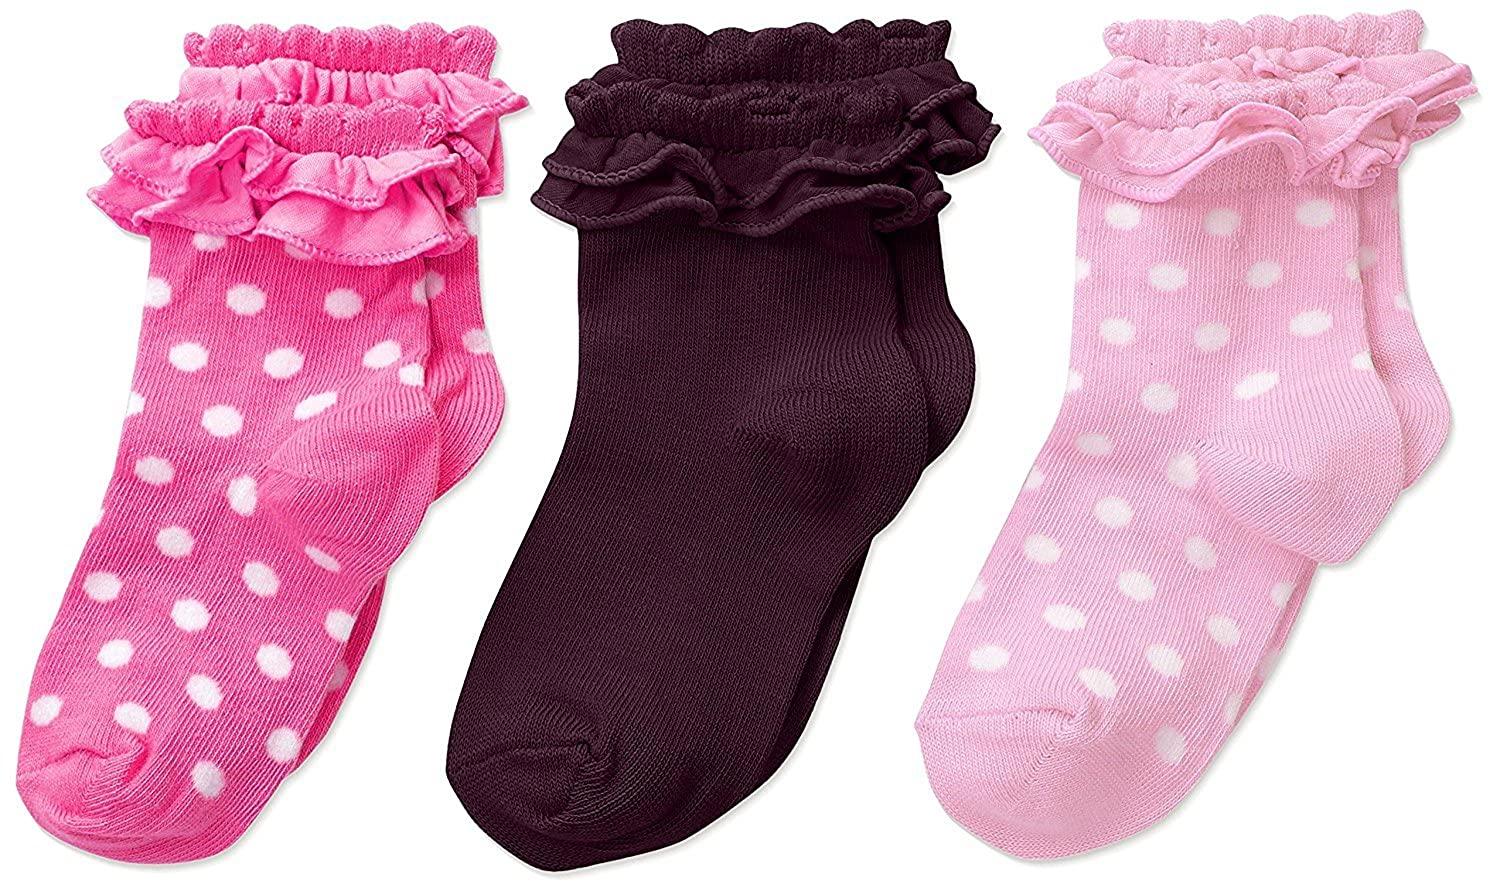 FOOTPRINTS Organic cotton Baby Girls Frill Socks- 12-24 Months - Pack of 3 pairs (Pink, Violet)